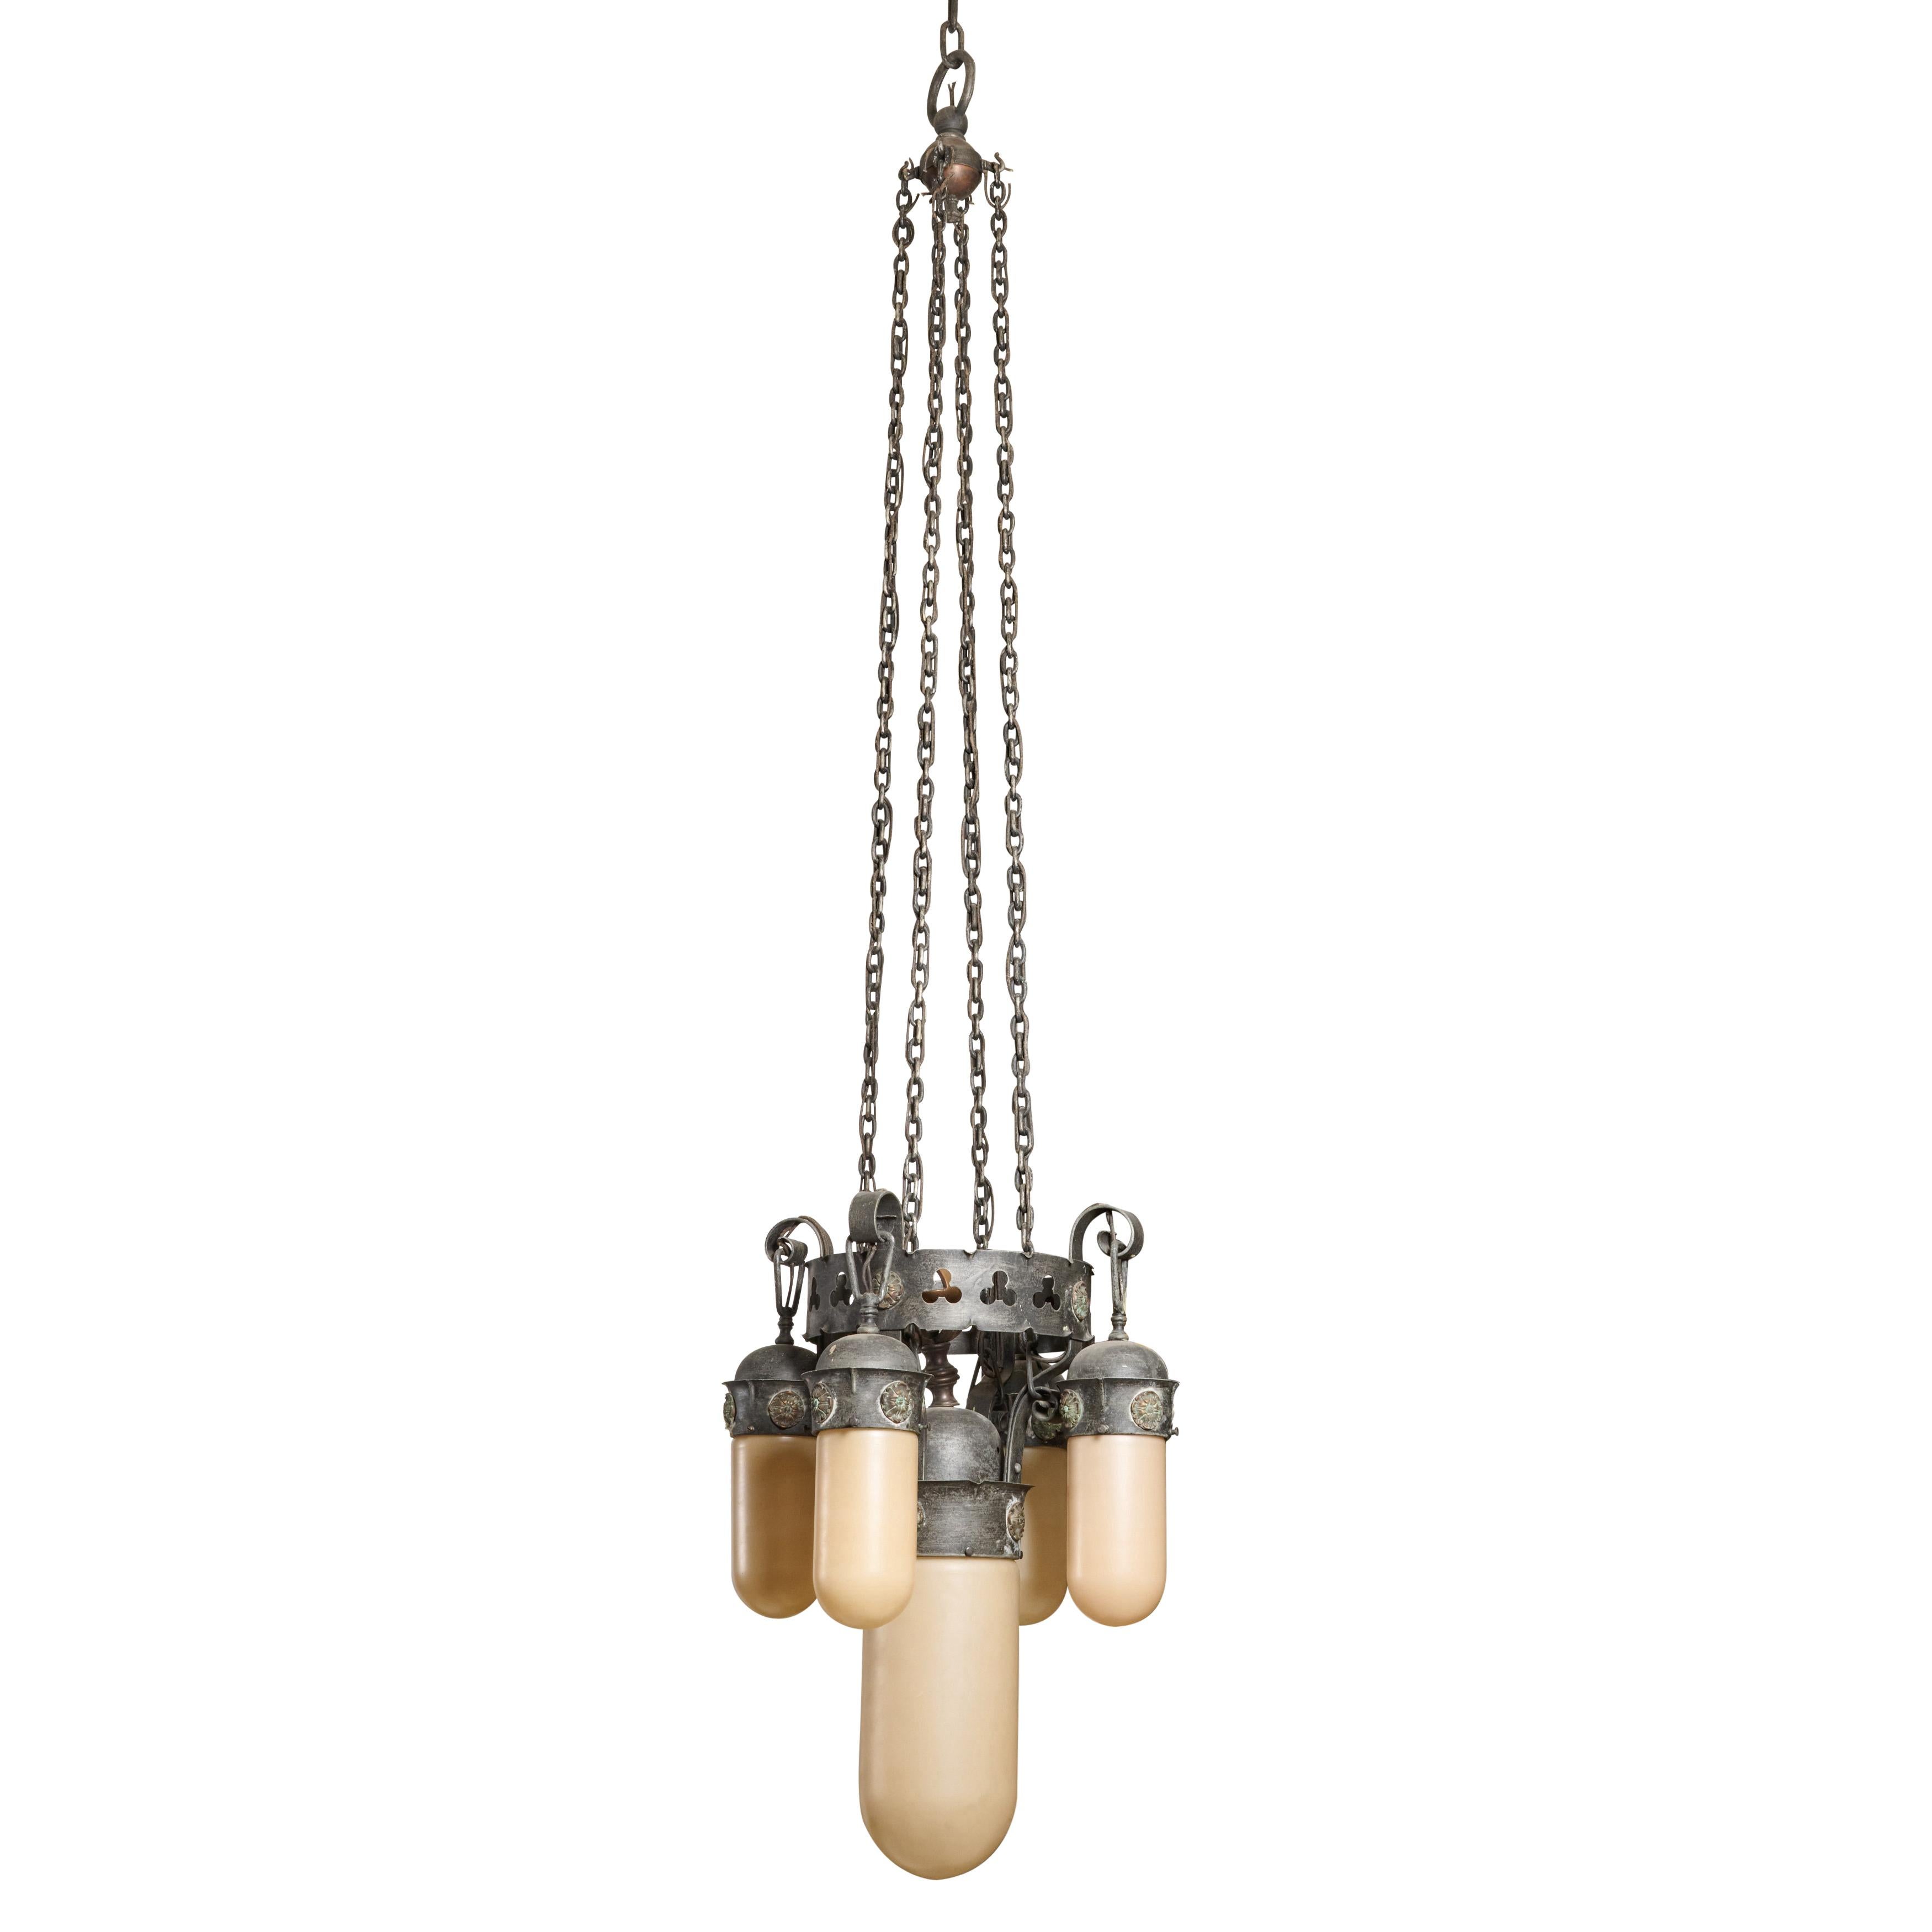 Fantastic wrought iron five light chandelier with great shades. Length of drop is adjustable. Excellent quality.